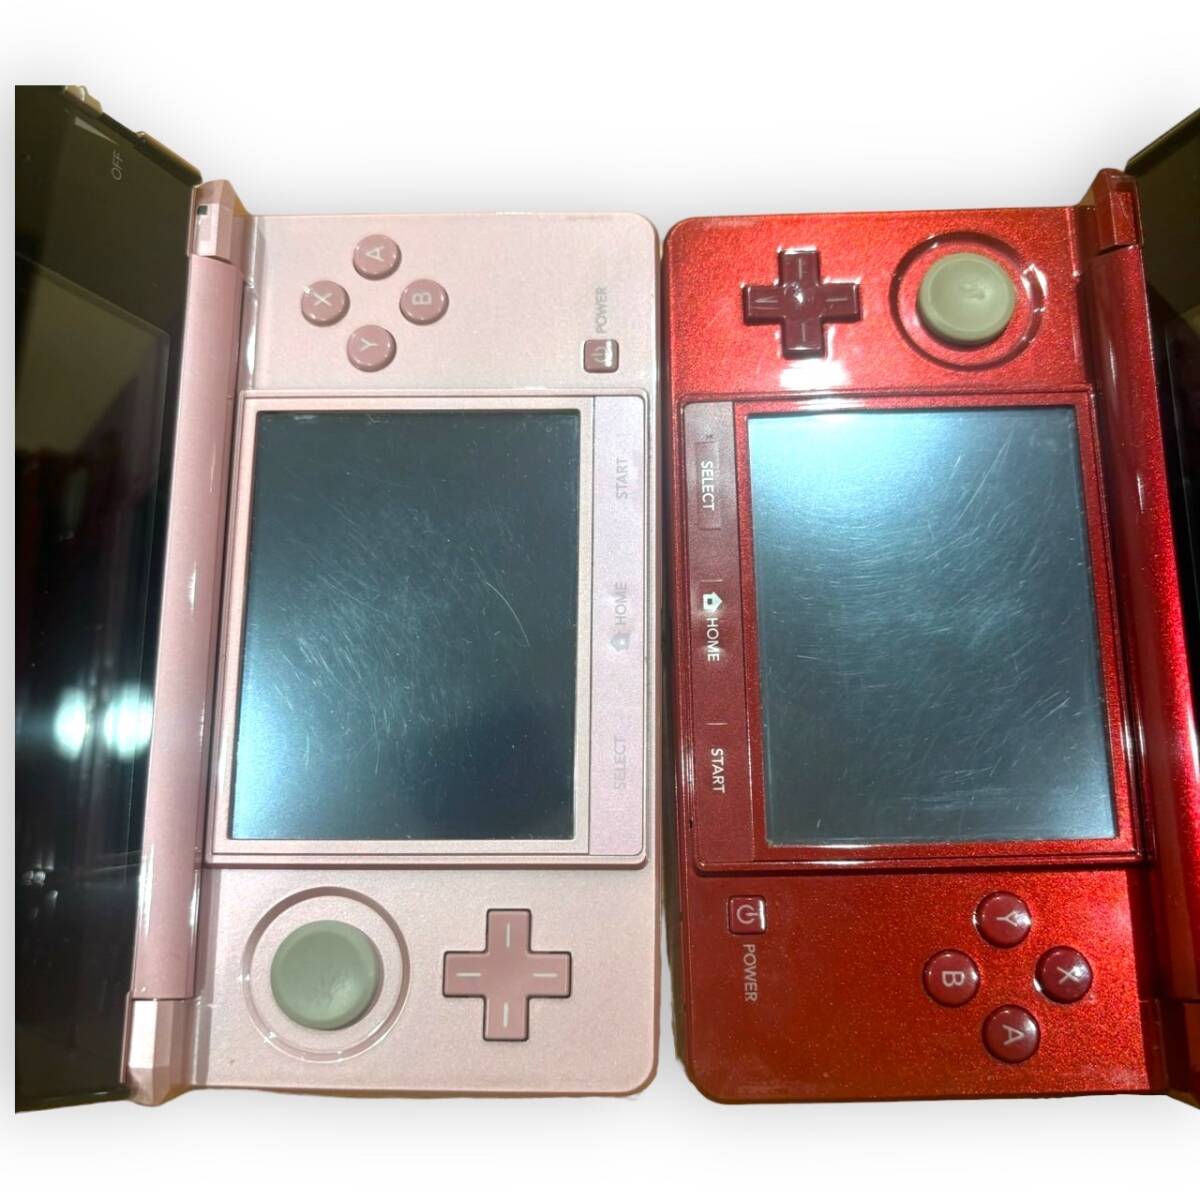  nintendo NINTENDO DSi body white 2 point with charger ./3DS body red pink series 2 point 3DS exclusive use charge stand attaching the first period . start-up has confirmed 